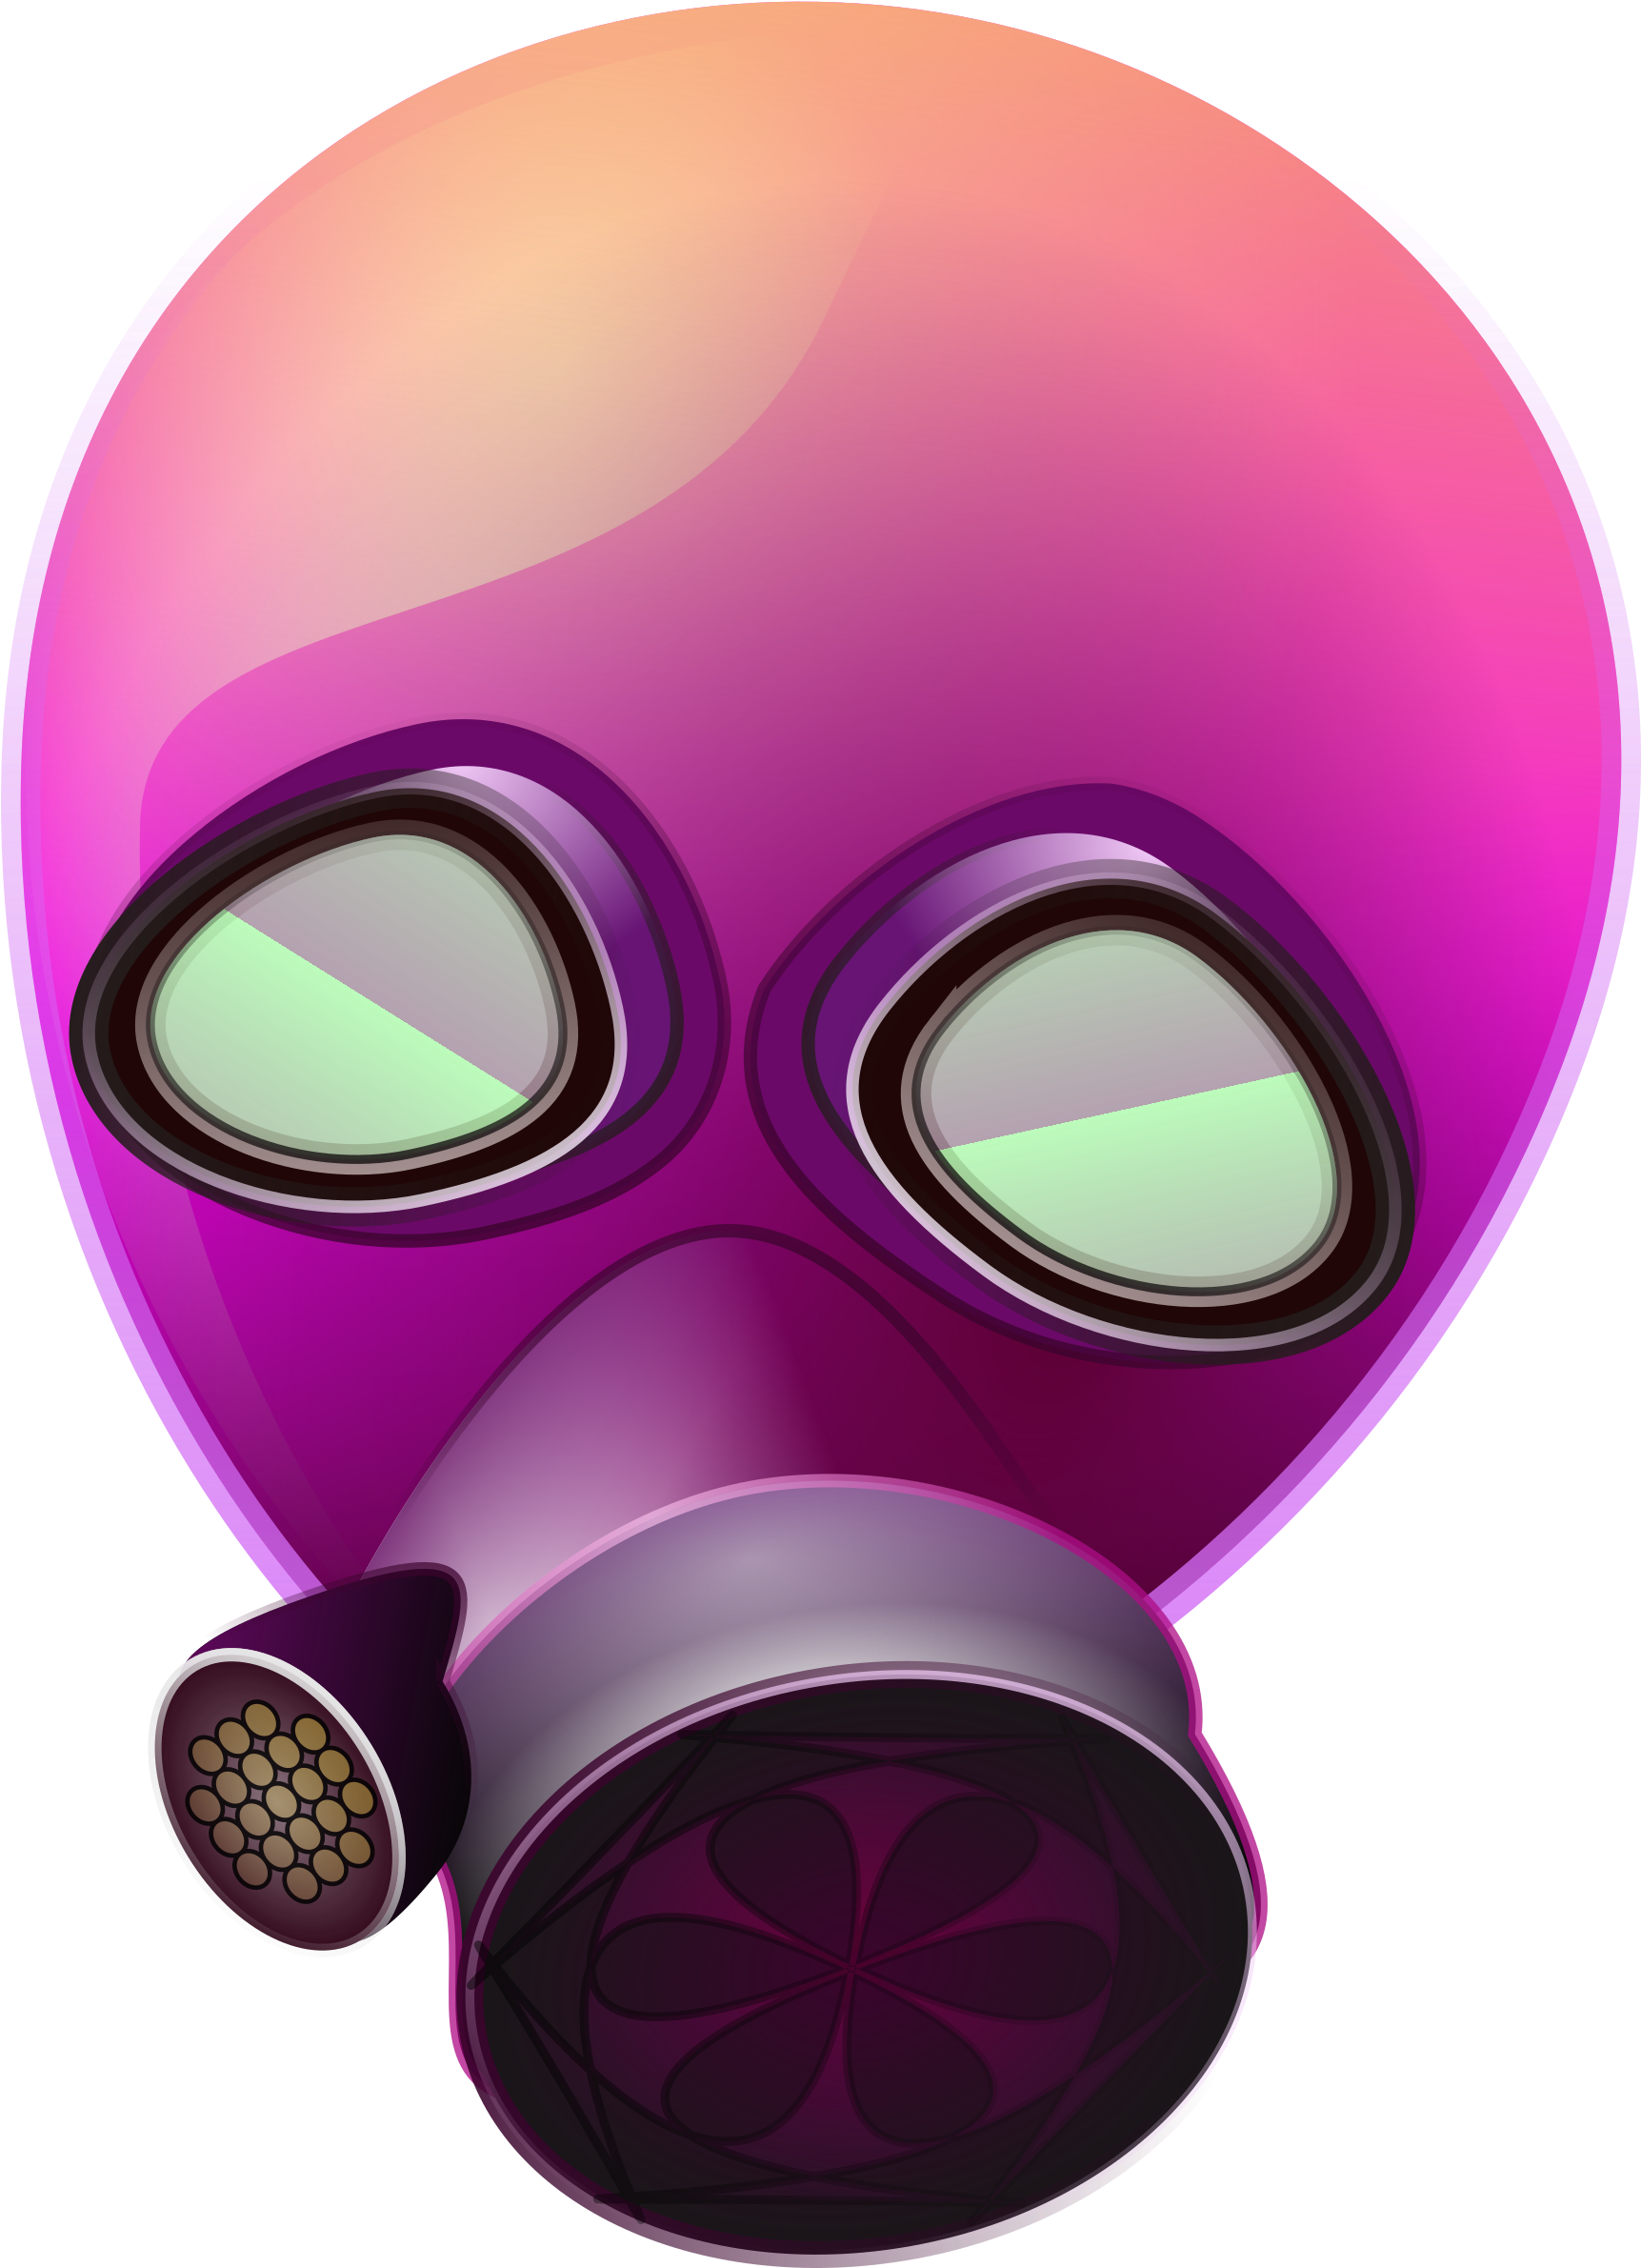 Gas Mask - Portable Network Graphics (1722x2400)